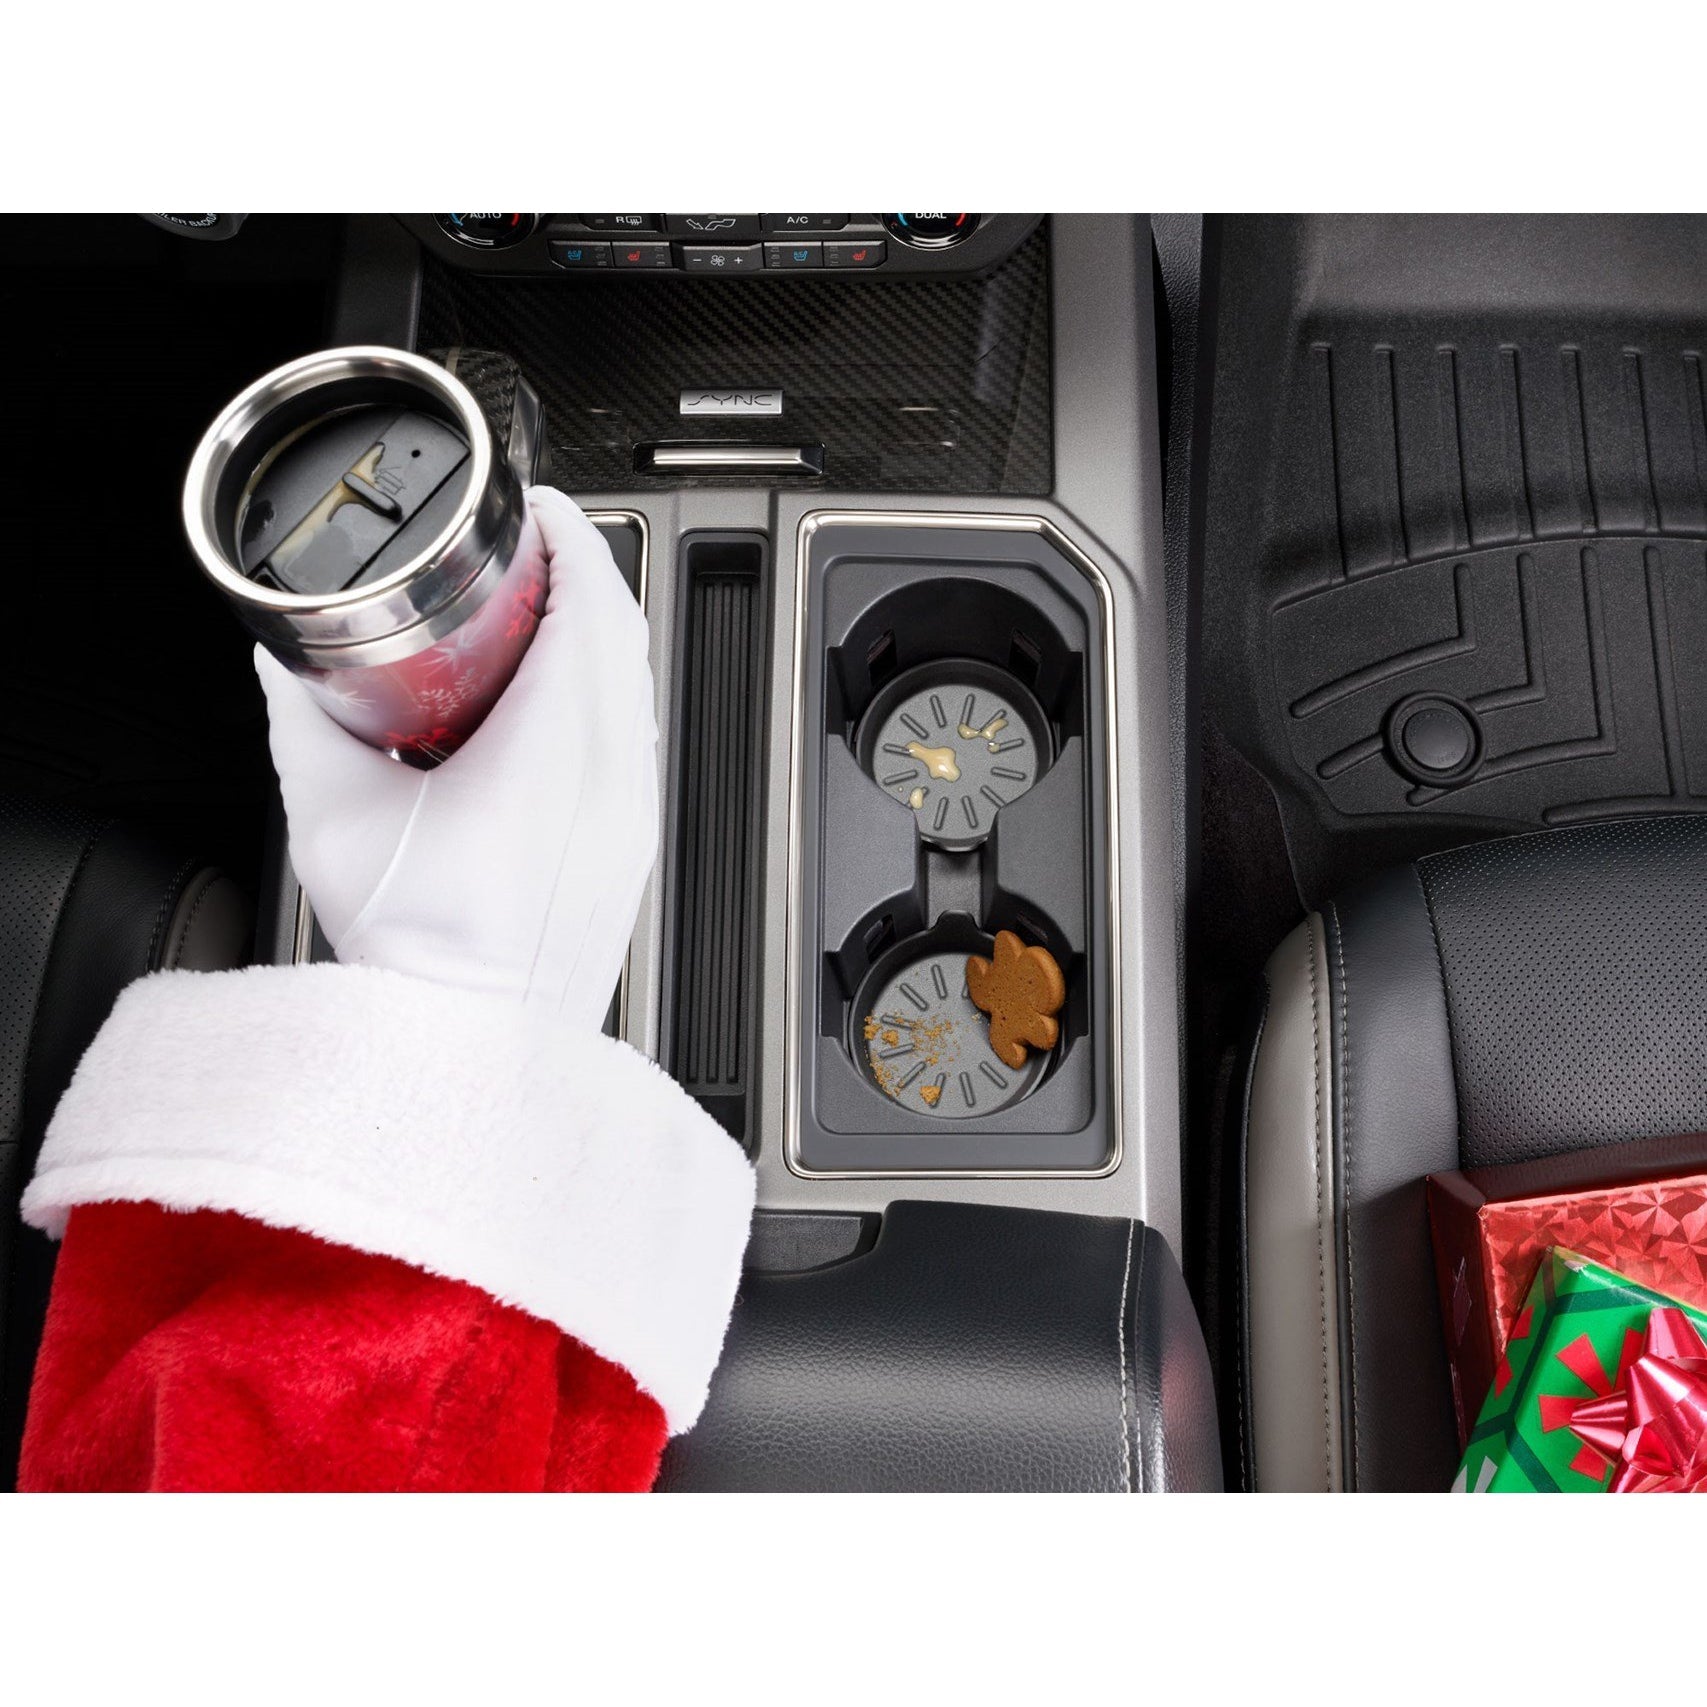 WeatherTech Accessories for Your Cup Holder